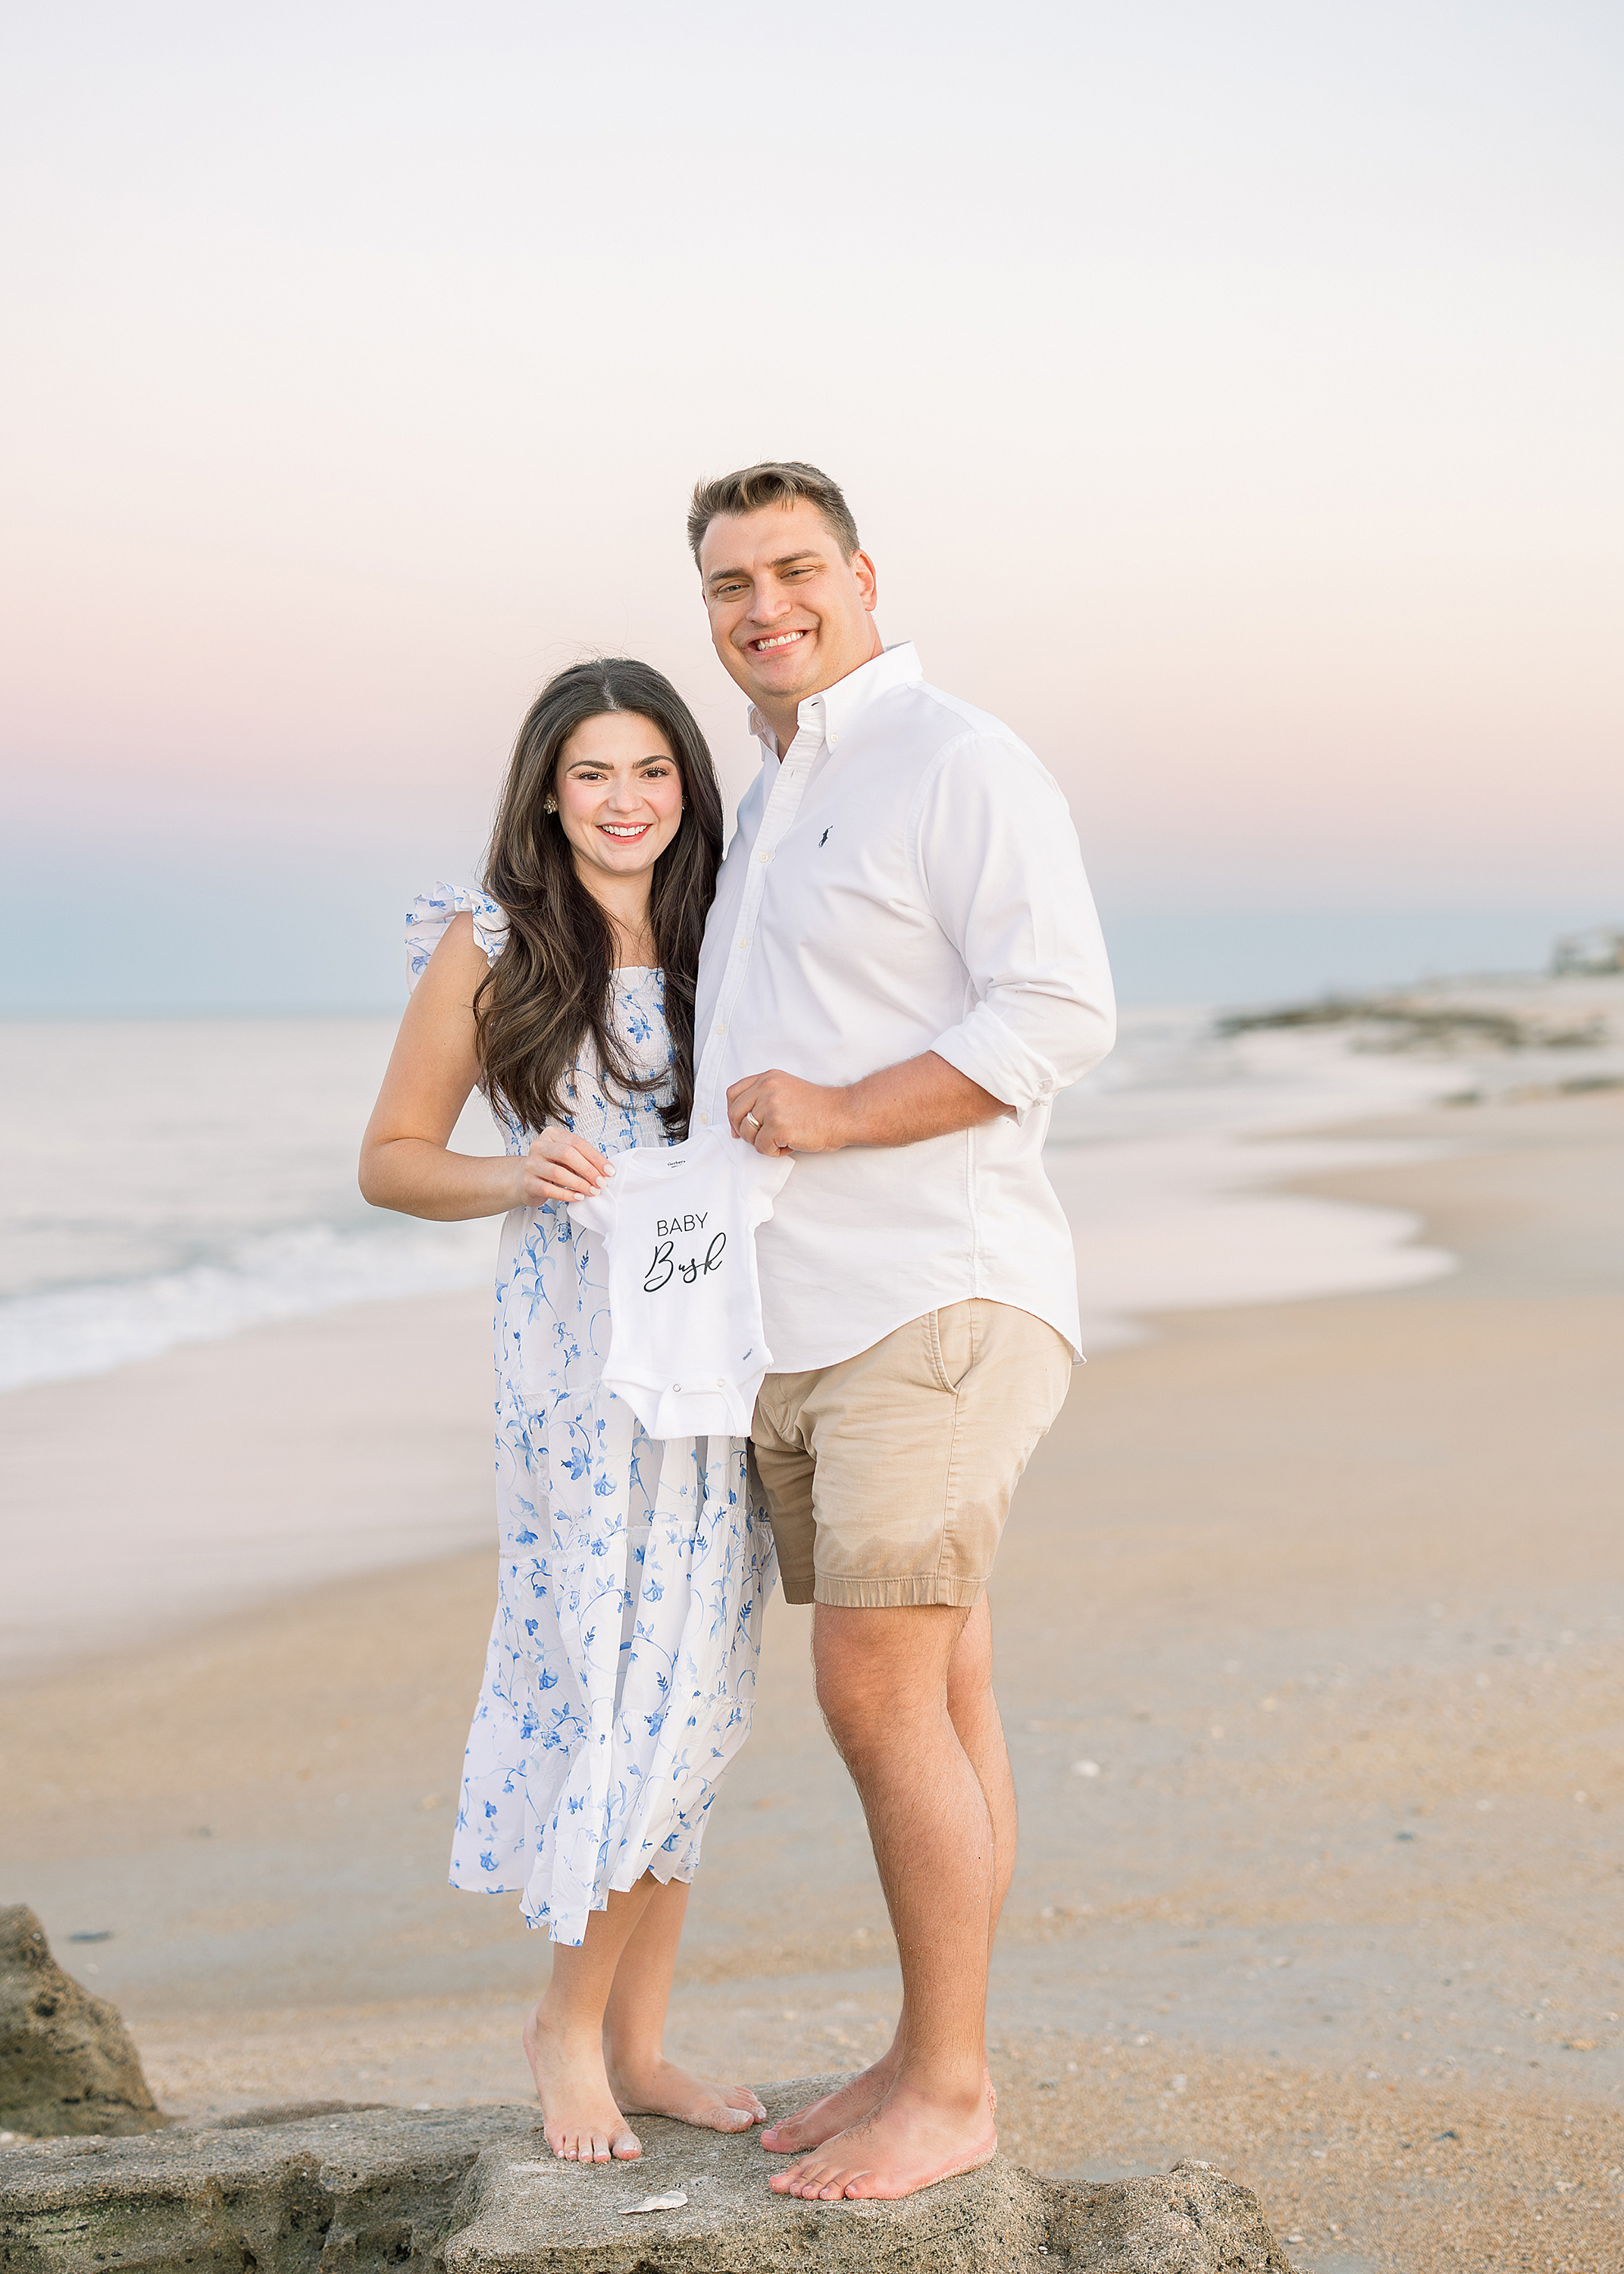 A pregnancy announcement portrait of a couple on St. Augustine Beach at sunset.